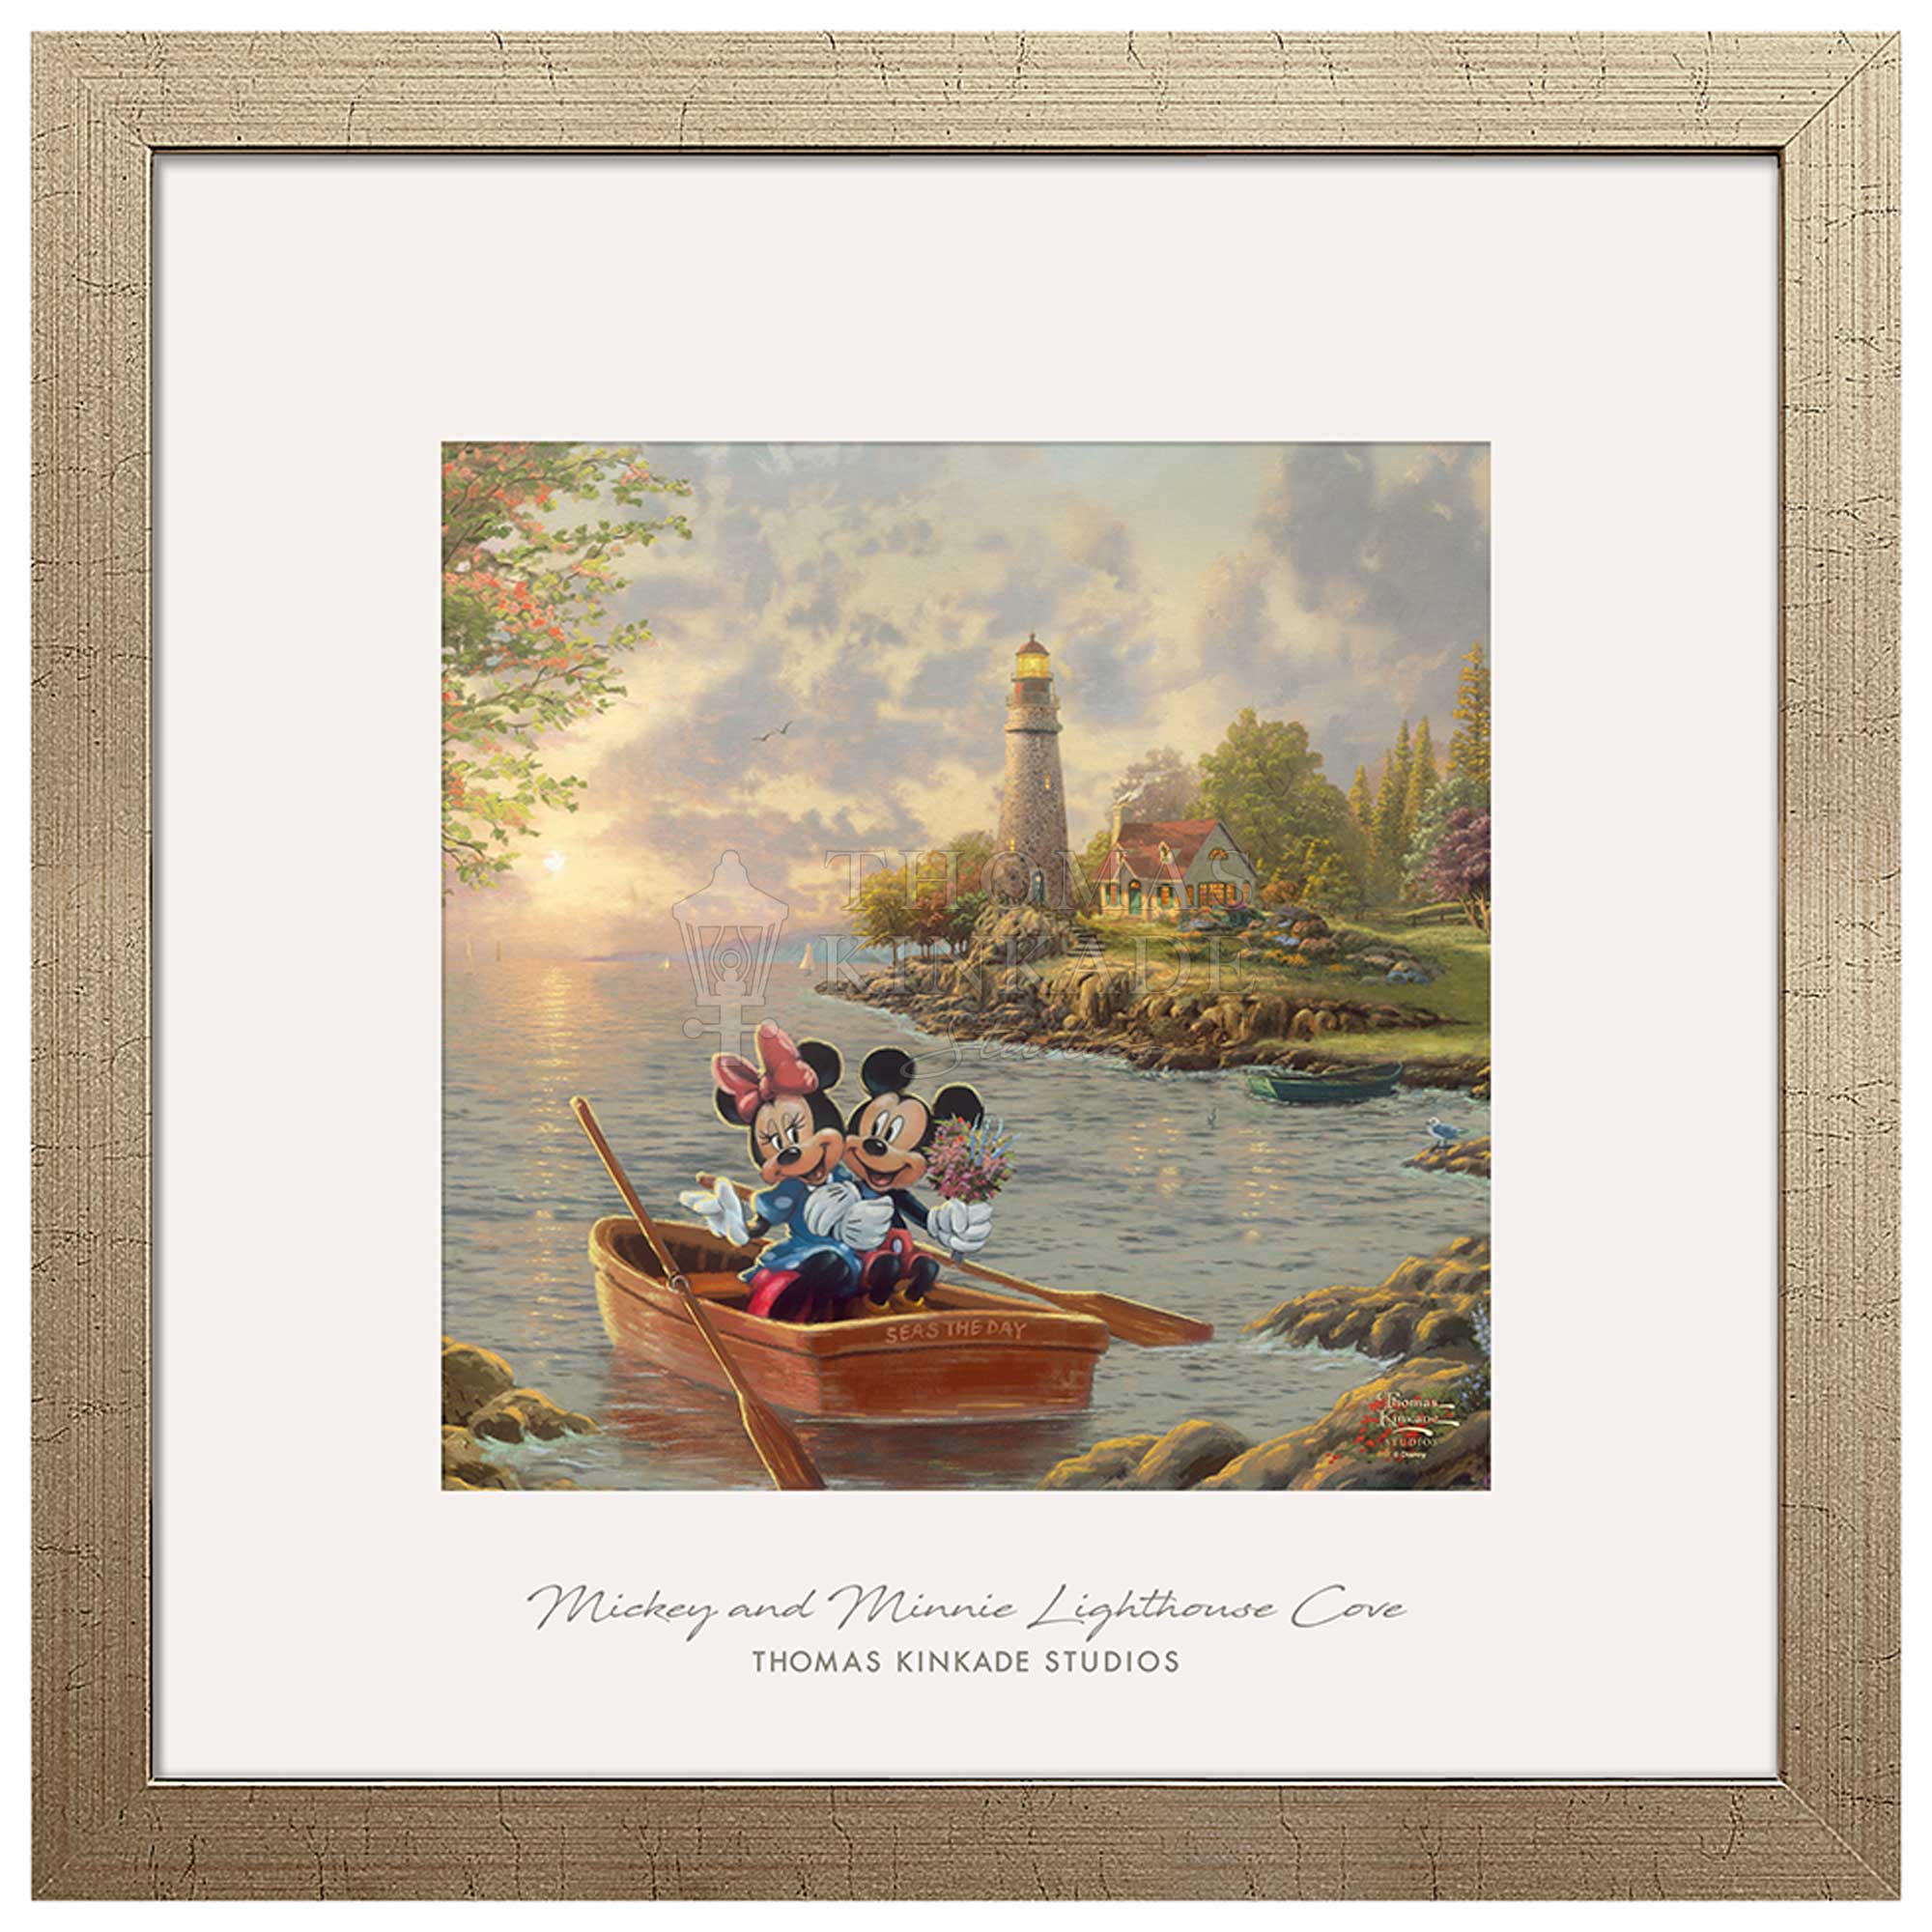 Mickey and Minnie are enjoying each other’s company as the evening breeze softly blows the waves onto the rocks. The vibrant colors of the flowers and the verdant sea grass makes the time spent together even more beautiful.